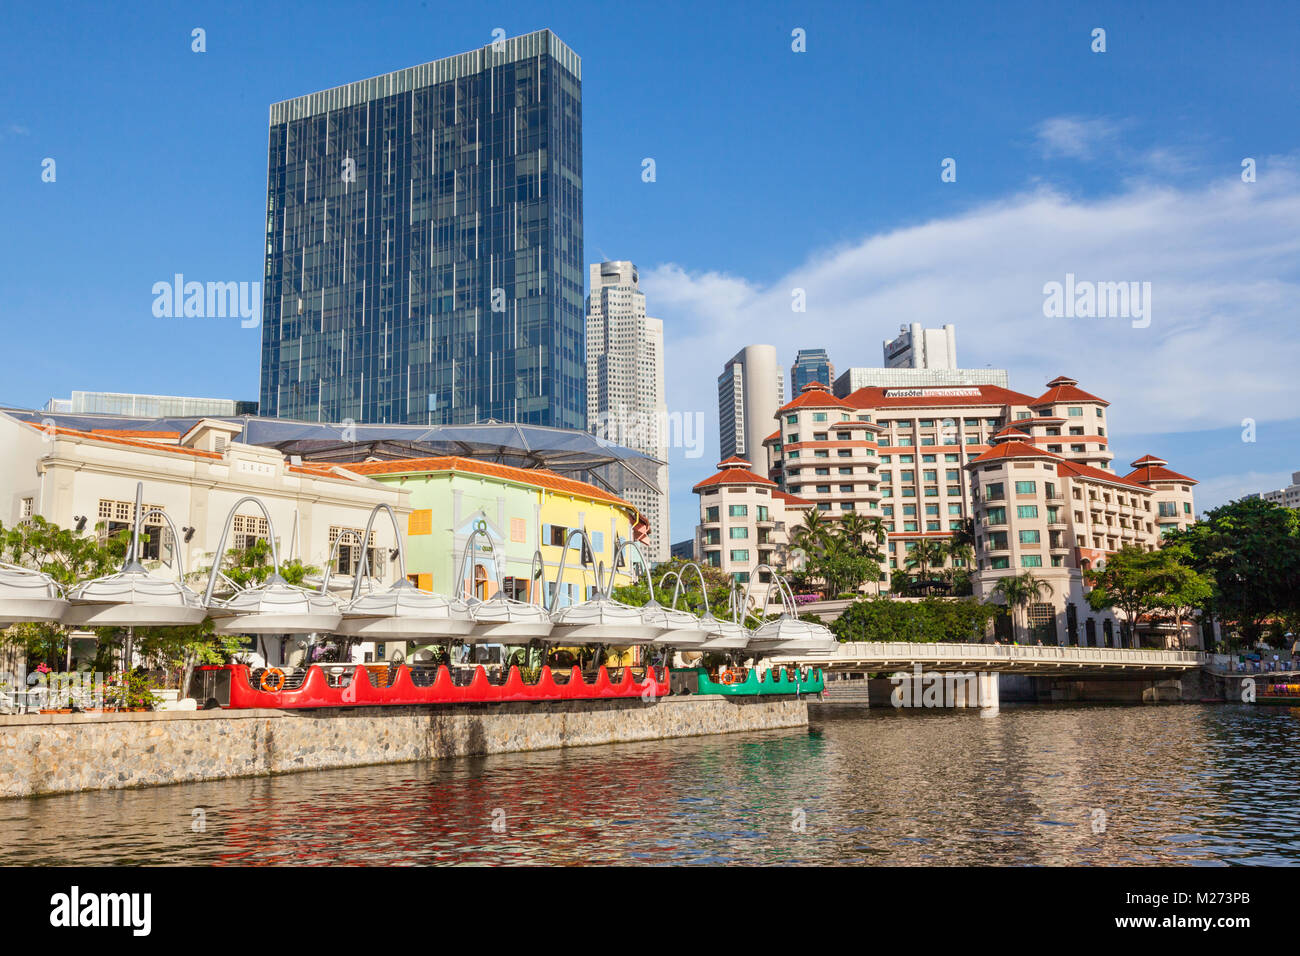 The Swissotel Merchant Court Hotel overlooking the Singapore River, with Clarke Quay on the left and skyscrapers in the background. Stock Photo